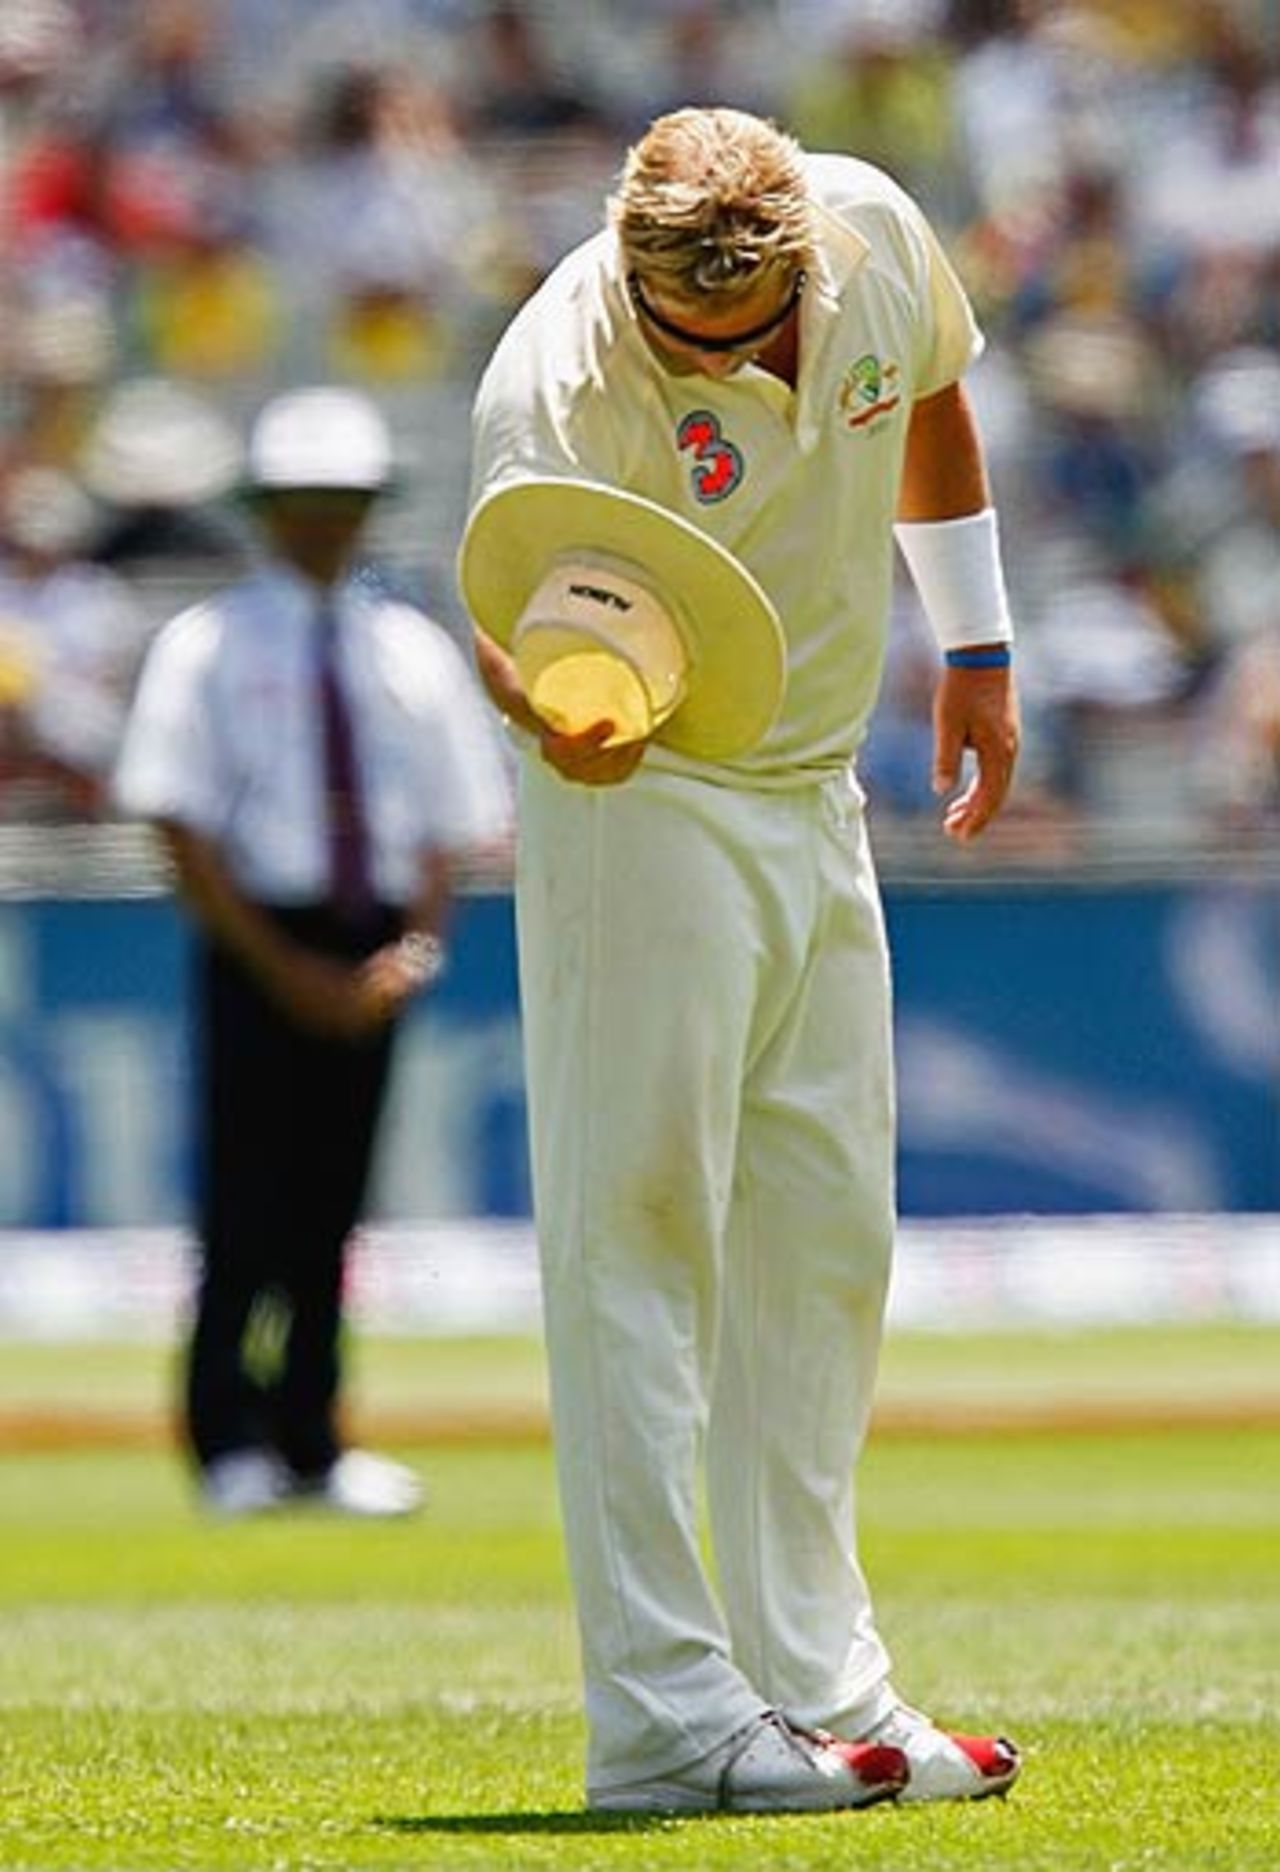 Shane Warne dofts his hat to a more than receptive crowd, Australia v South Africa, 2nd Test, Melbourne, 3rd day, December 28, 2005